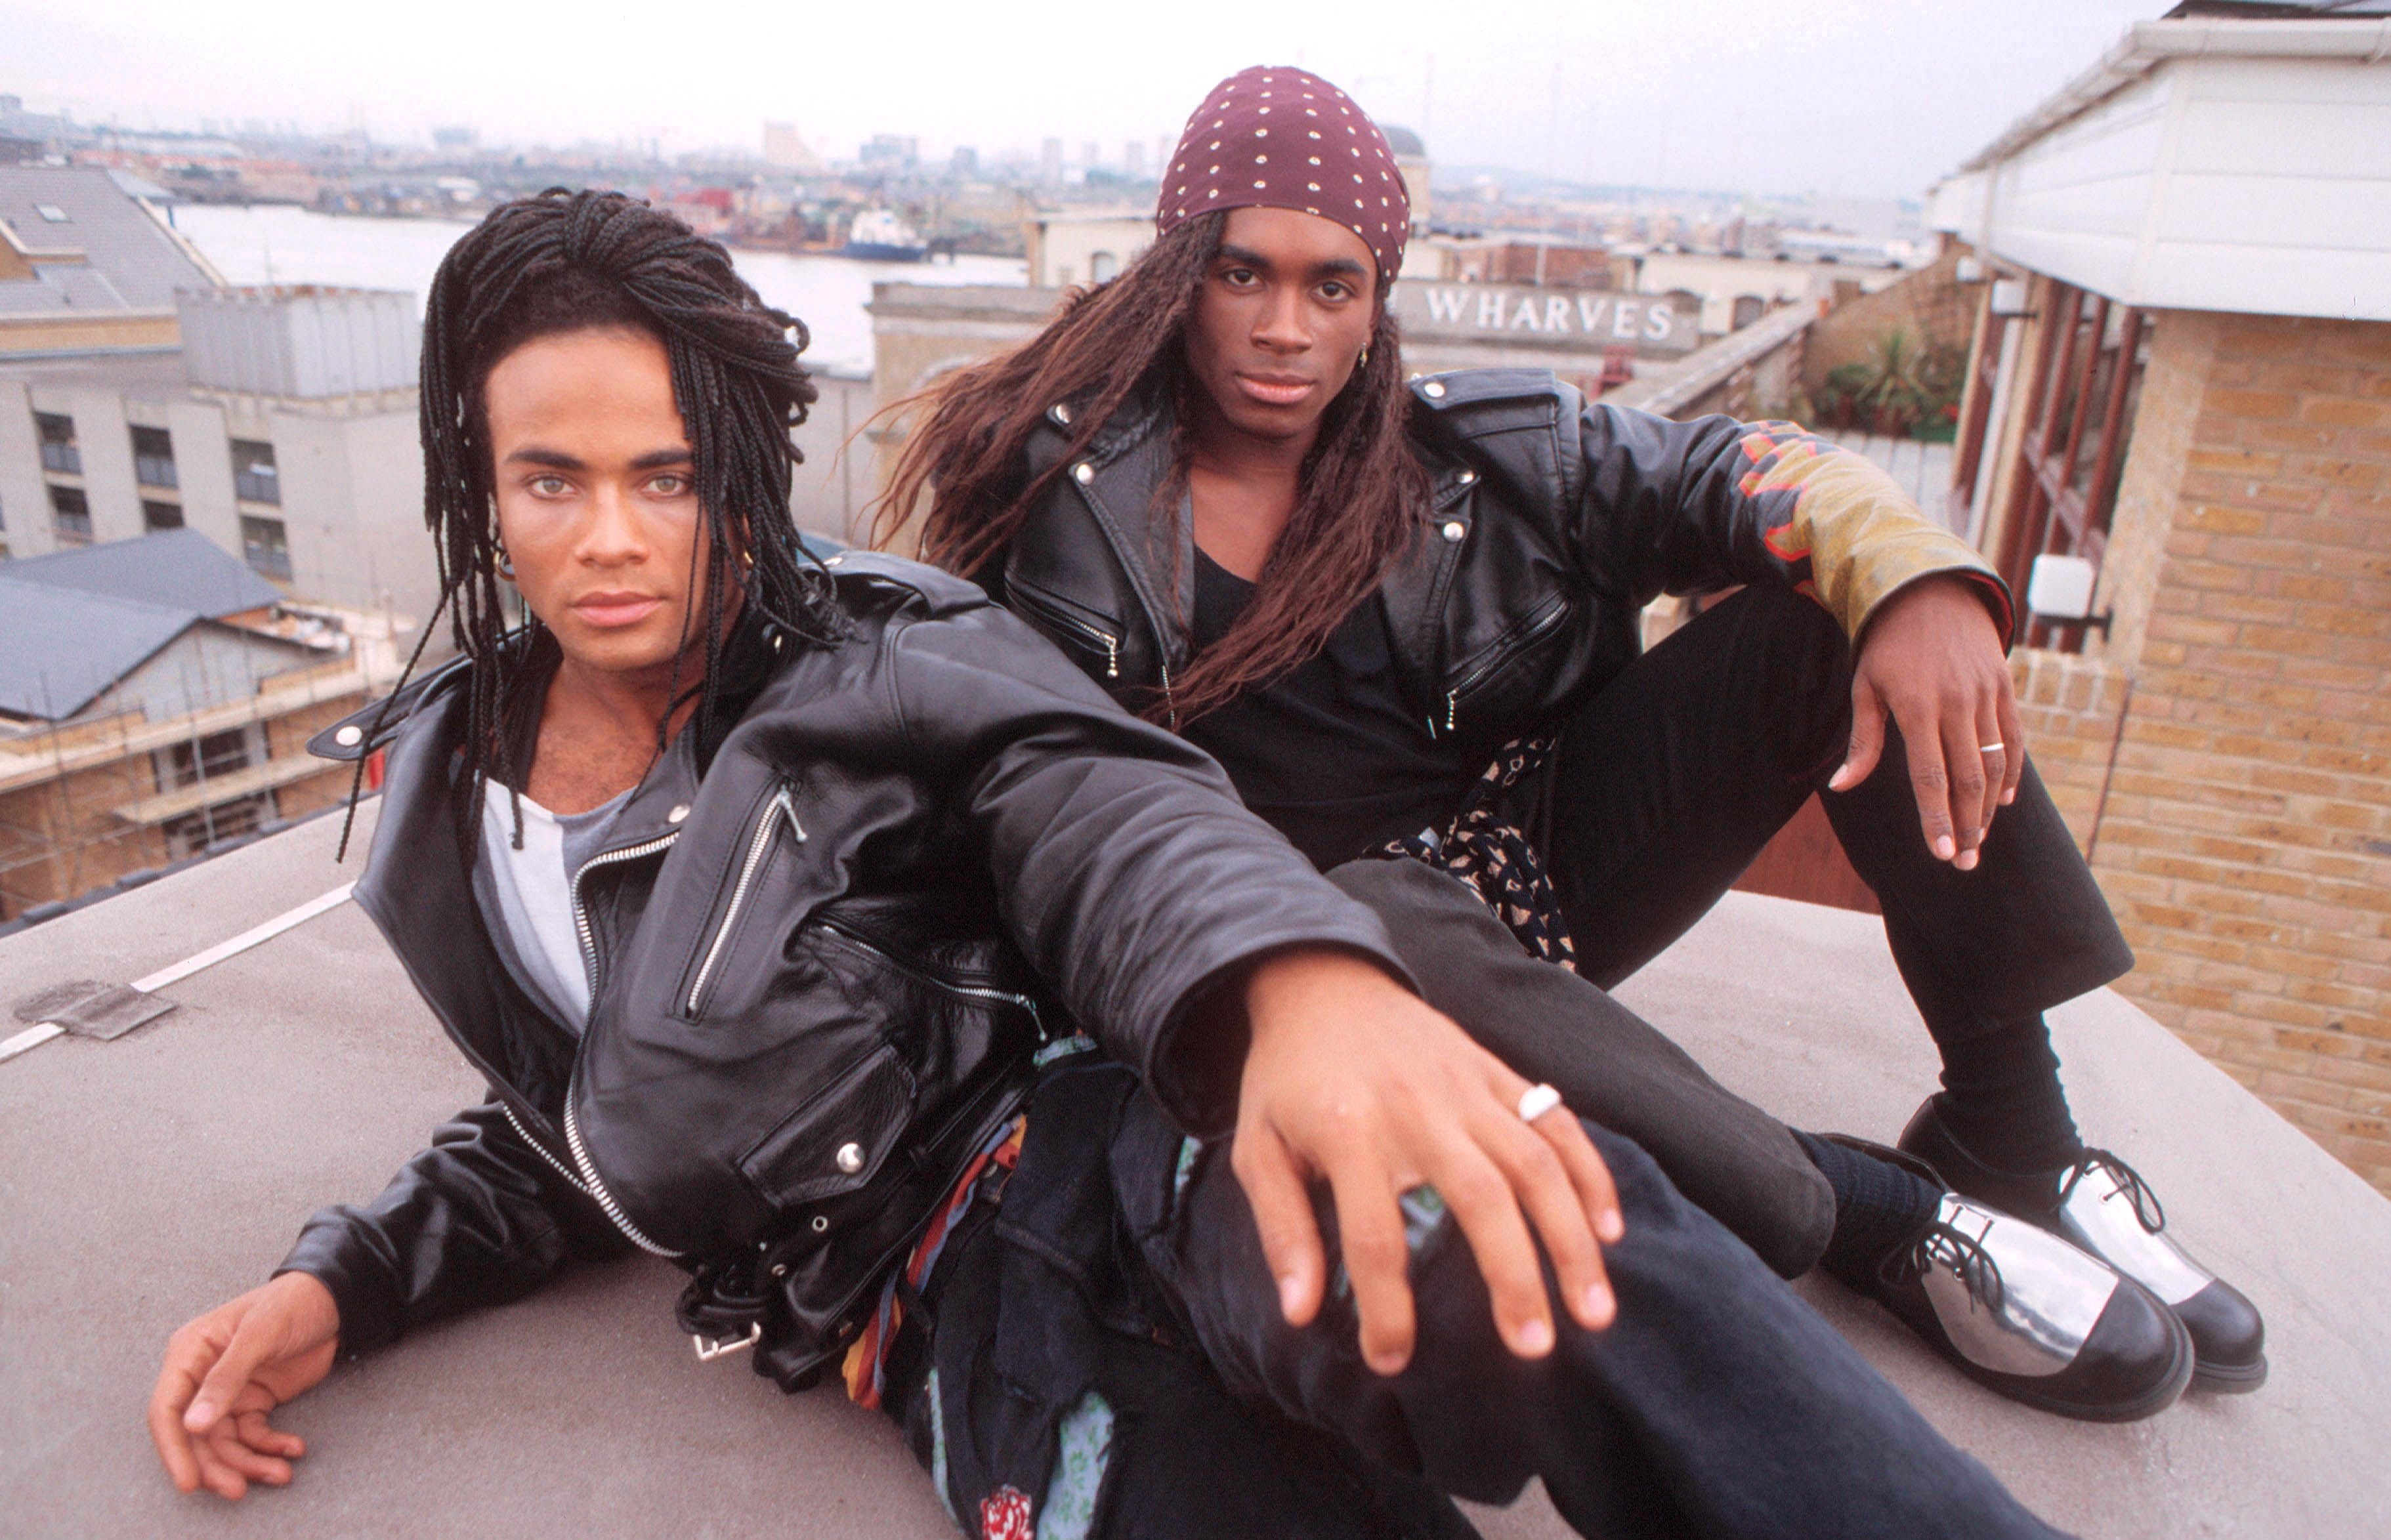 Milli Vanilli's Lip-Sync Scandal: Inside One of Music's Biggest Hoaxes